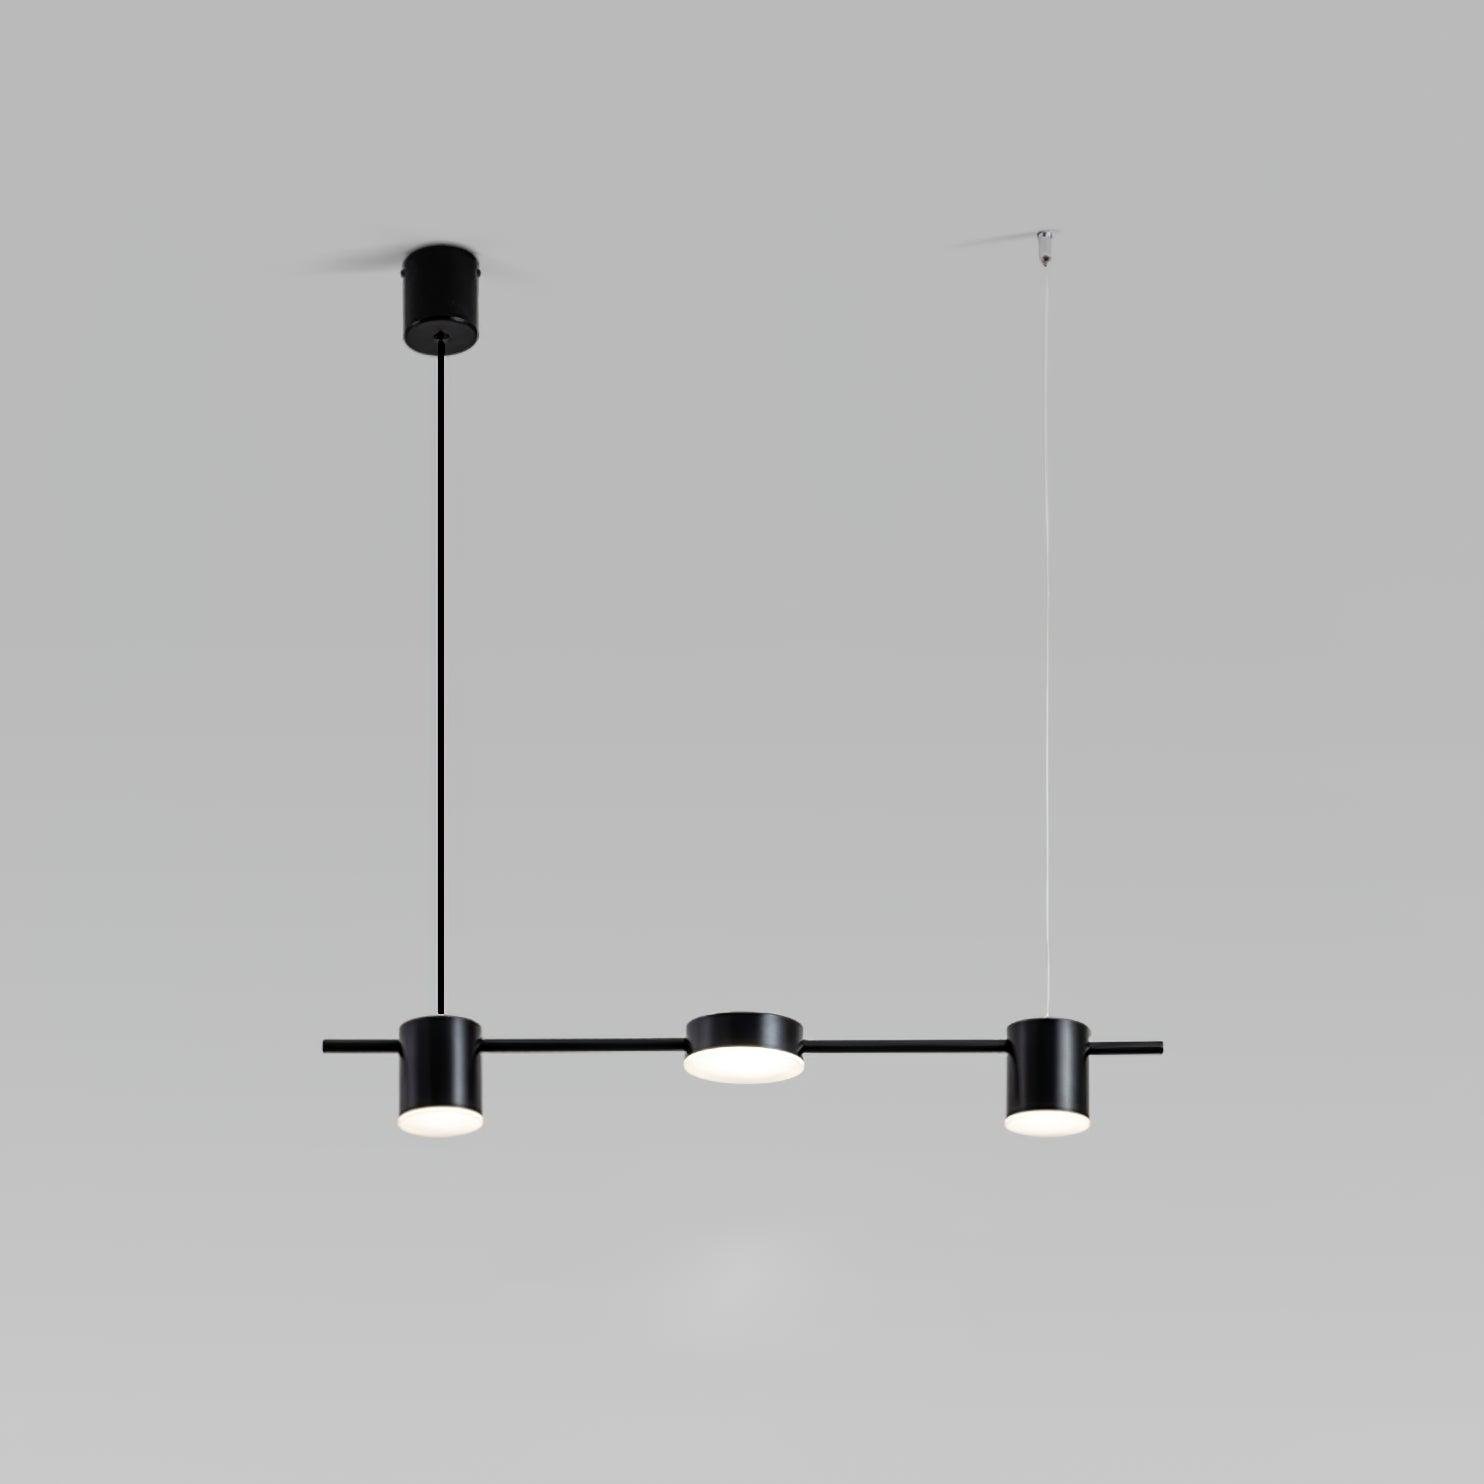 Black LED Linear Chandelier Counterpoint with 3 Heads, emitting Cool White light - Size: L 27.6 inches x H 59 inches, or L 70cm x H 150cm.